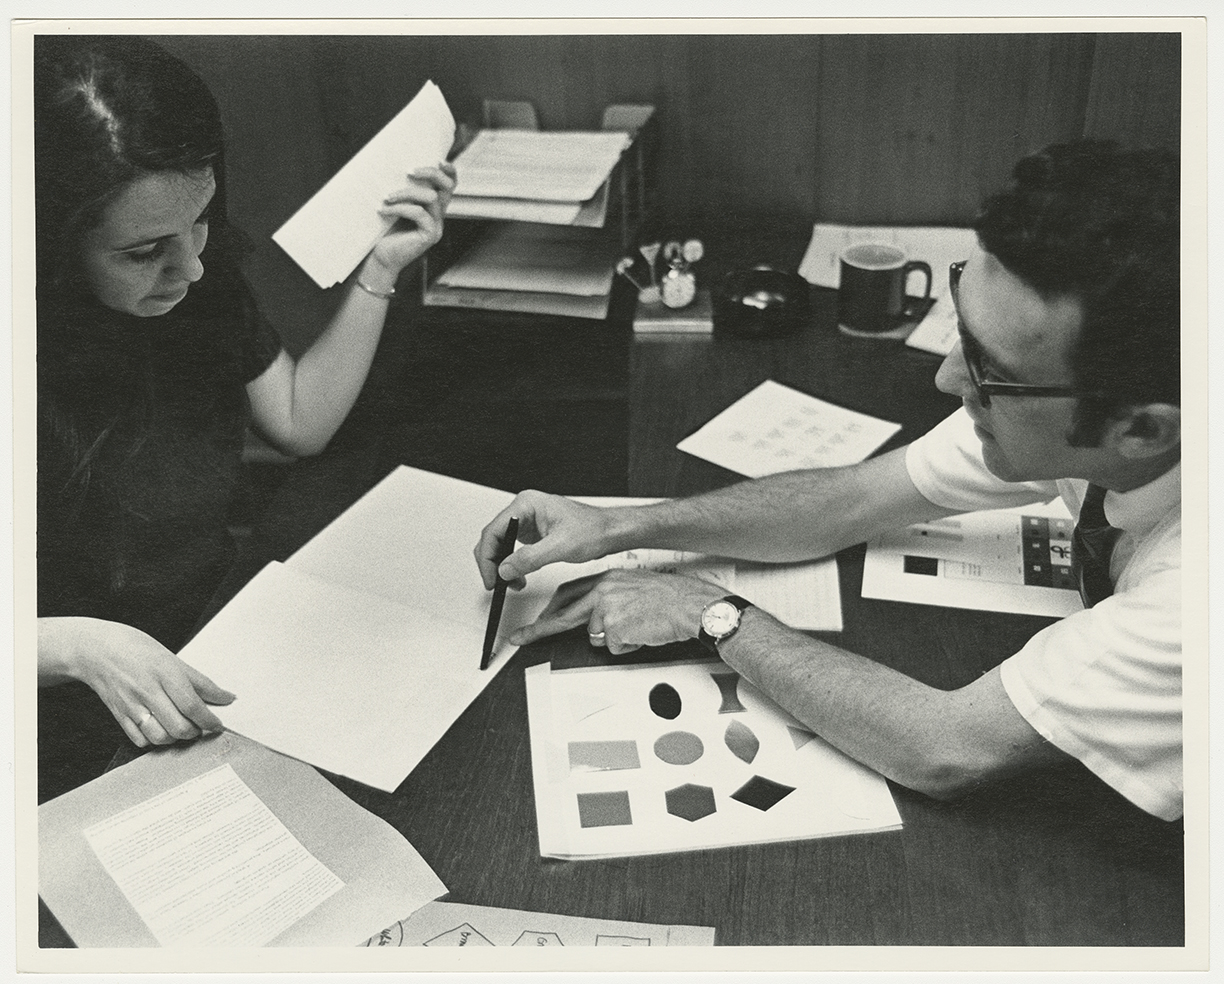 Black-and-white photograph of two people working together at a desk. Between them are papers, some containing shapes and symbols in a variety of color tones.